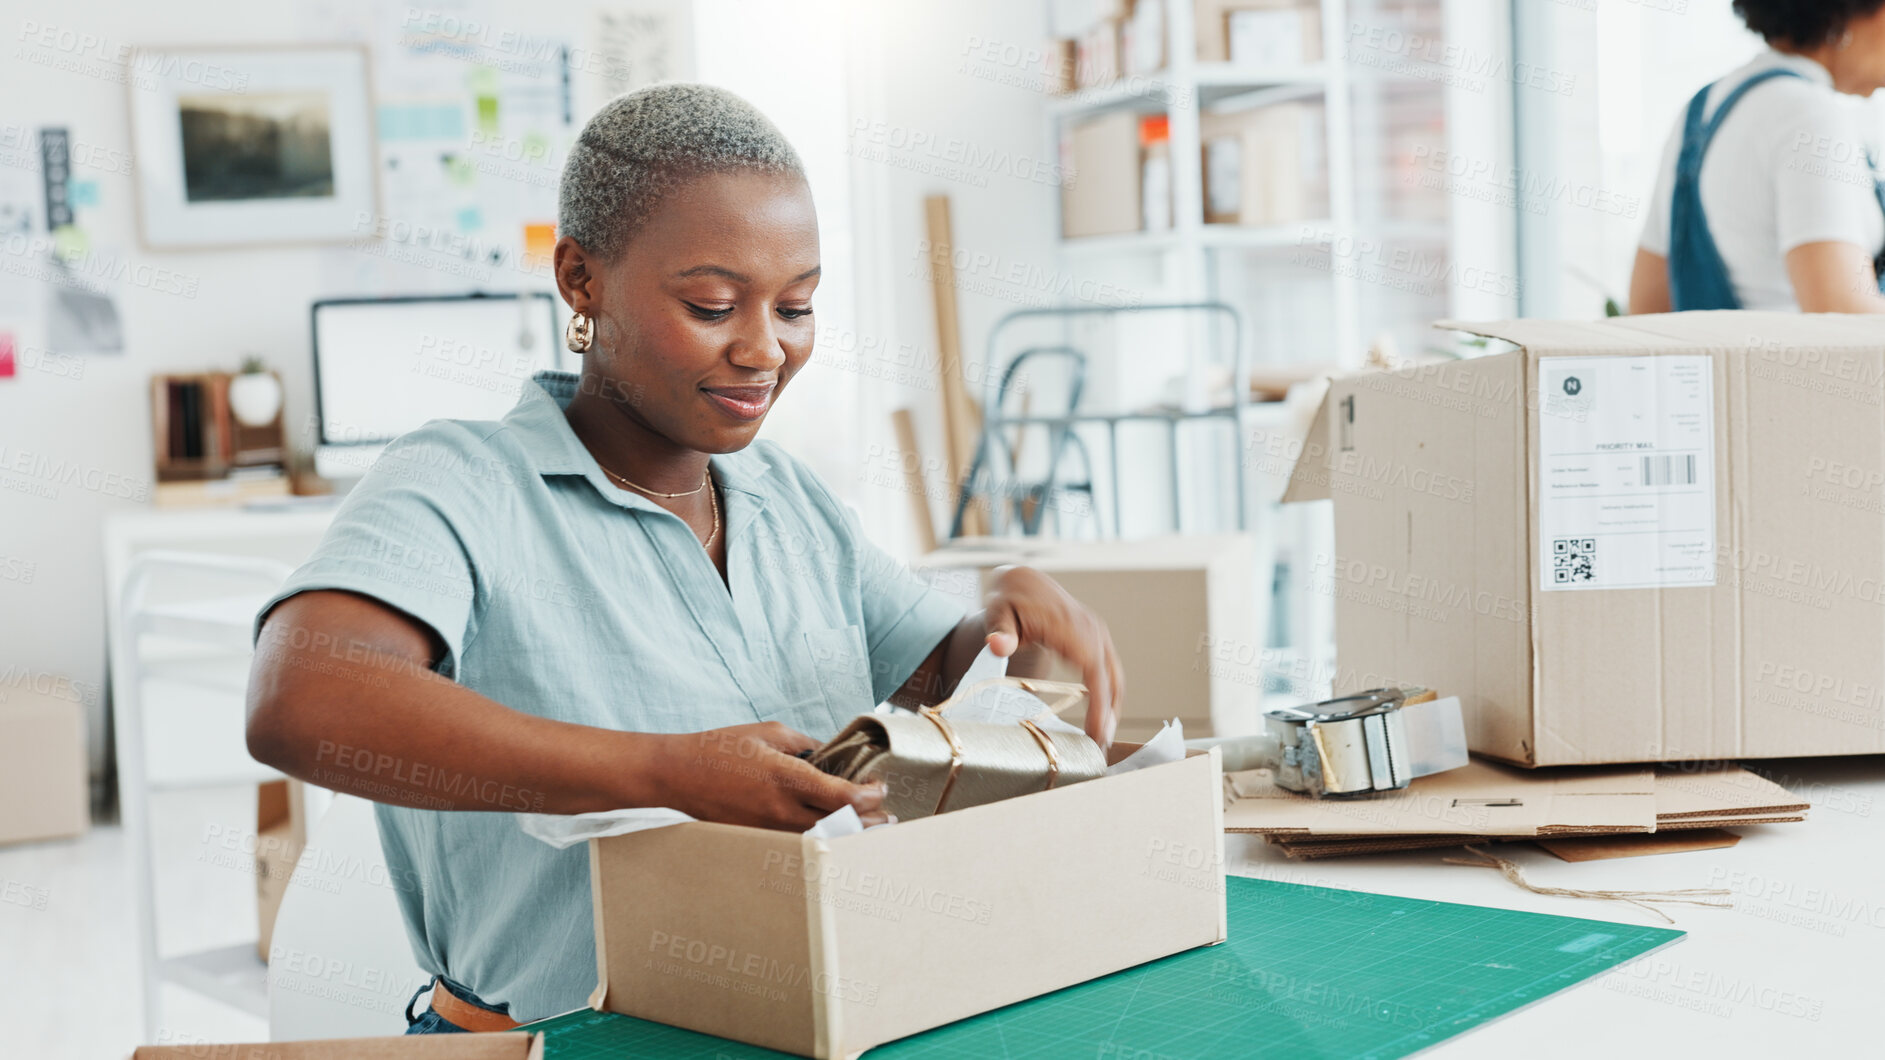 Buy stock photo Ecommerce, black woman packing boxes in office for sales and delivery, seller at creative startup with smile. Online shopping, package and small business owner with product, stock or retail web store